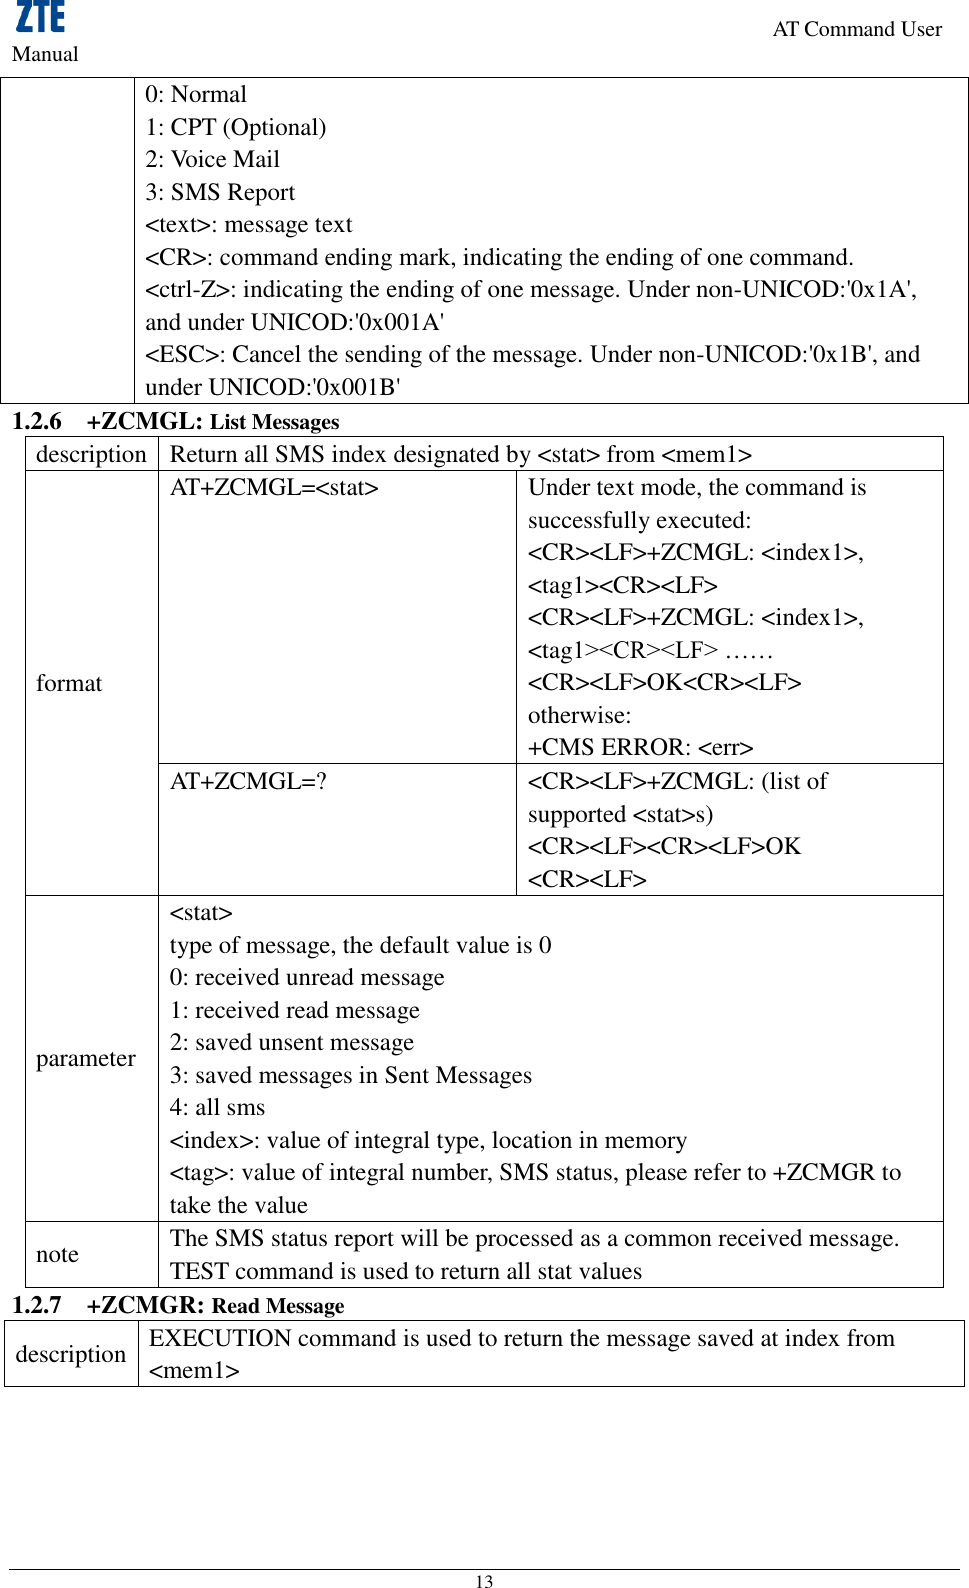                                                                     AT Command User Manual 13 0: Normal 1: CPT (Optional)   2: Voice Mail 3: SMS Report   &lt;text&gt;: message text   &lt;CR&gt;: command ending mark, indicating the ending of one command.       &lt;ctrl-Z&gt;: indicating the ending of one message. Under non-UNICOD:&apos;0x1A&apos;, and under UNICOD:&apos;0x001A&apos;   &lt;ESC&gt;: Cancel the sending of the message. Under non-UNICOD:&apos;0x1B&apos;, and under UNICOD:&apos;0x001B&apos; 1.2.6 +ZCMGL: List Messages description Return all SMS index designated by &lt;stat&gt; from &lt;mem1&gt; format AT+ZCMGL=&lt;stat&gt; Under text mode, the command is successfully executed:   &lt;CR&gt;&lt;LF&gt;+ZCMGL: &lt;index1&gt;, &lt;tag1&gt;&lt;CR&gt;&lt;LF&gt; &lt;CR&gt;&lt;LF&gt;+ZCMGL: &lt;index1&gt;, &lt;tag1&gt;&lt;CR&gt;&lt;LF&gt; …… &lt;CR&gt;&lt;LF&gt;OK&lt;CR&gt;&lt;LF&gt;   otherwise: +CMS ERROR: &lt;err&gt; AT+ZCMGL=? &lt;CR&gt;&lt;LF&gt;+ZCMGL: (list of supported &lt;stat&gt;s) &lt;CR&gt;&lt;LF&gt;&lt;CR&gt;&lt;LF&gt;OK &lt;CR&gt;&lt;LF&gt; parameter &lt;stat&gt; type of message, the default value is 0 0: received unread message   1: received read message   2: saved unsent message   3: saved messages in Sent Messages   4: all sms &lt;index&gt;: value of integral type, location in memory     &lt;tag&gt;: value of integral number, SMS status, please refer to +ZCMGR to take the value note The SMS status report will be processed as a common received message.       TEST command is used to return all stat values 1.2.7 +ZCMGR: Read Message description EXECUTION command is used to return the message saved at index from &lt;mem1&gt; 